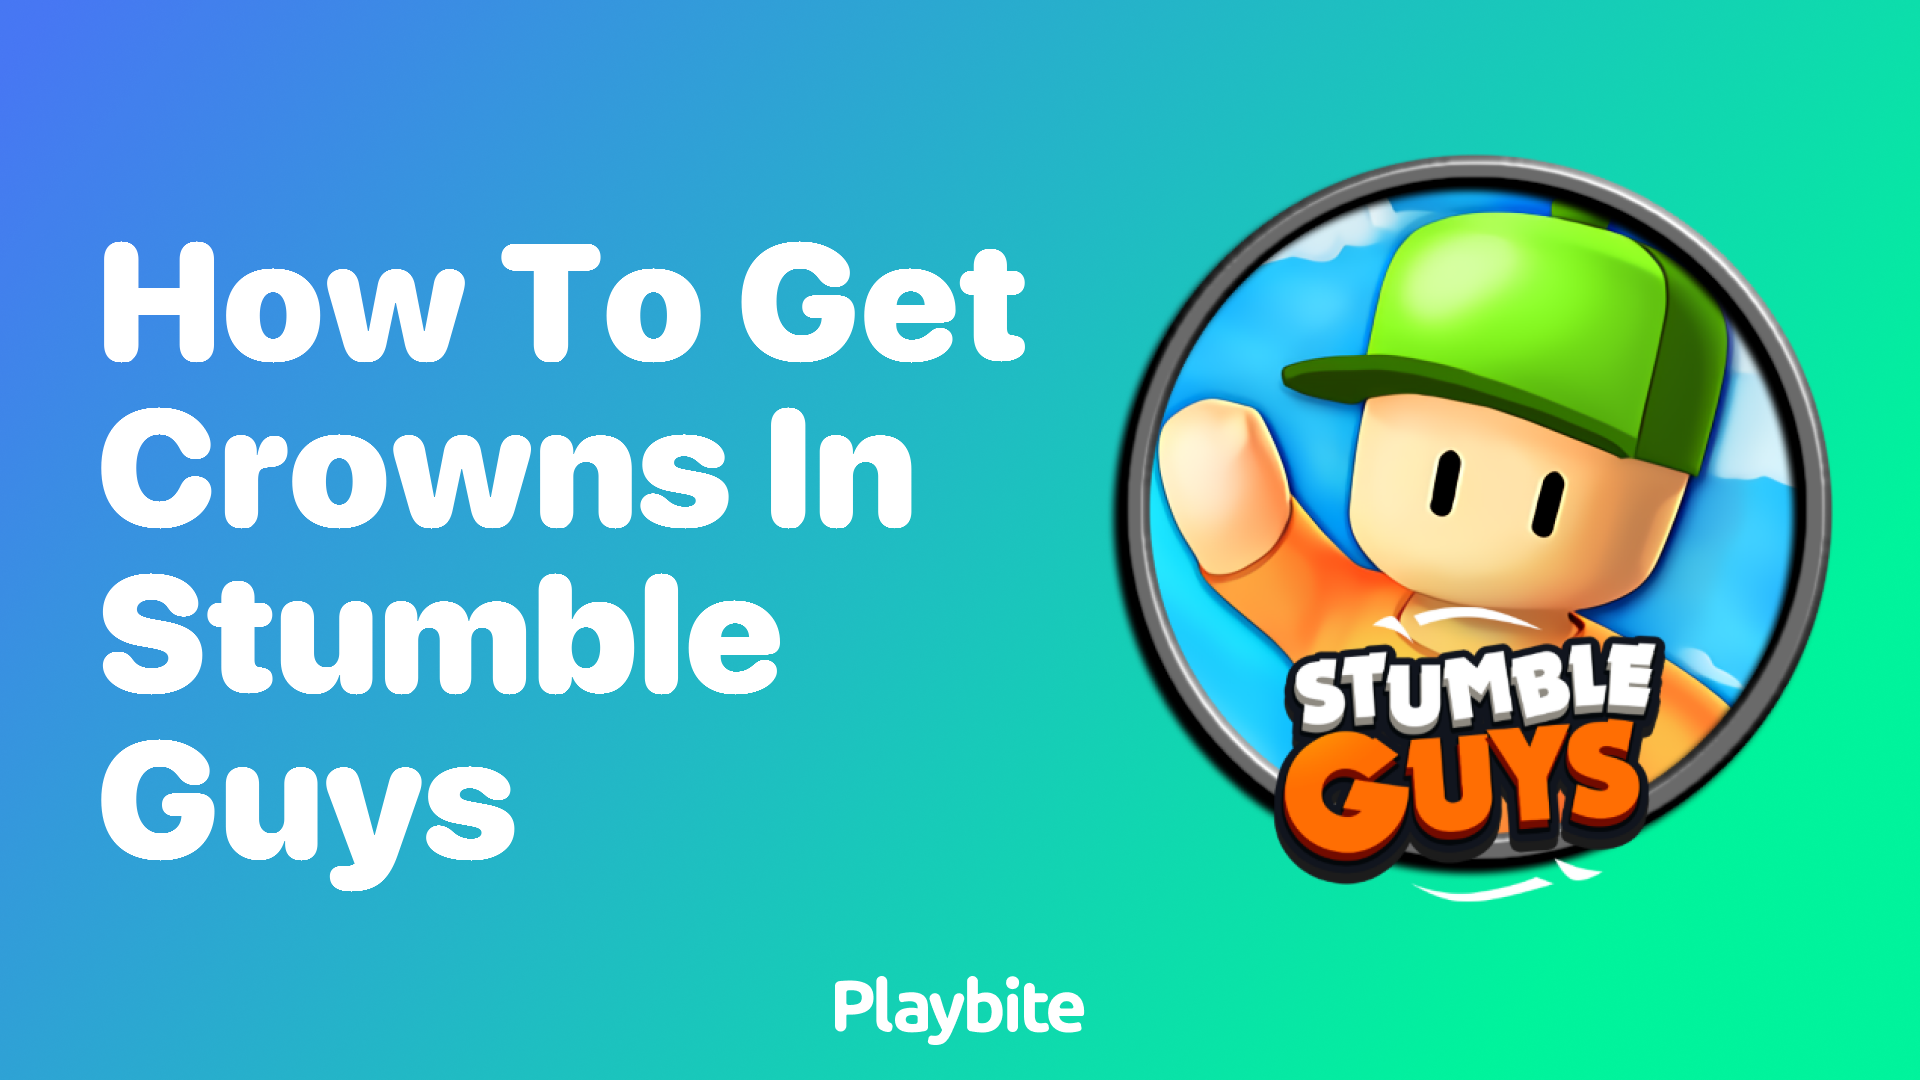 How to Get Crowns in Stumble Guys